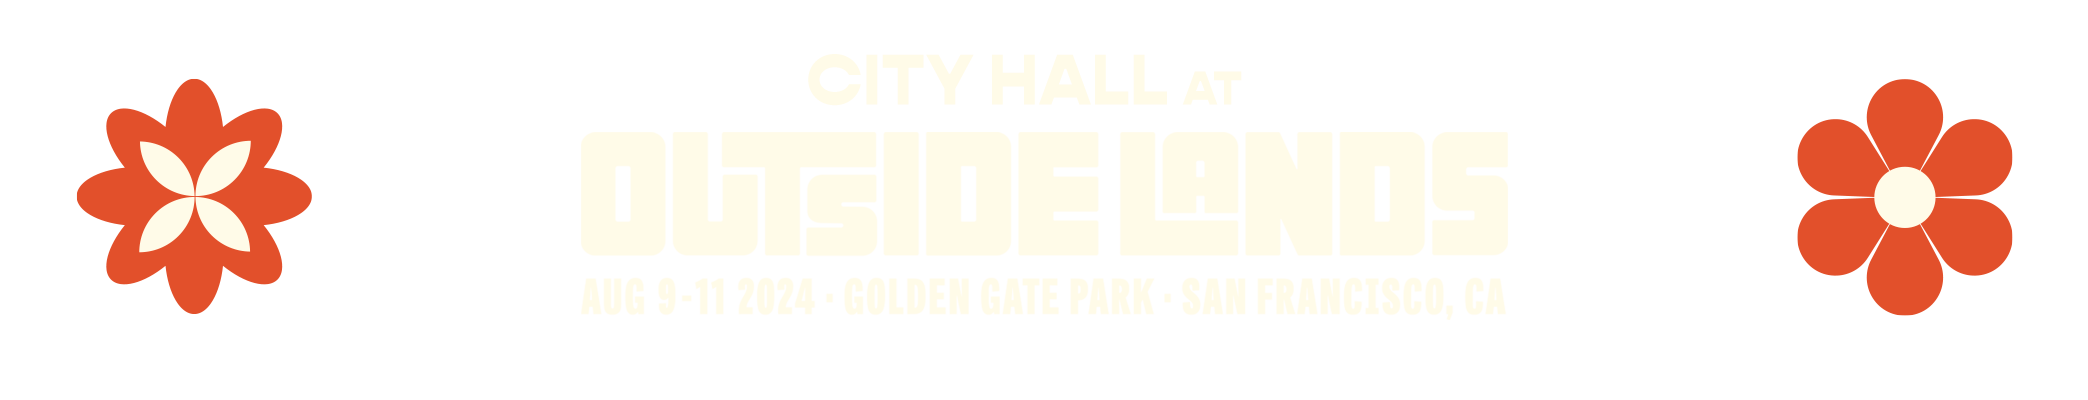 Outside Lands - City Hall